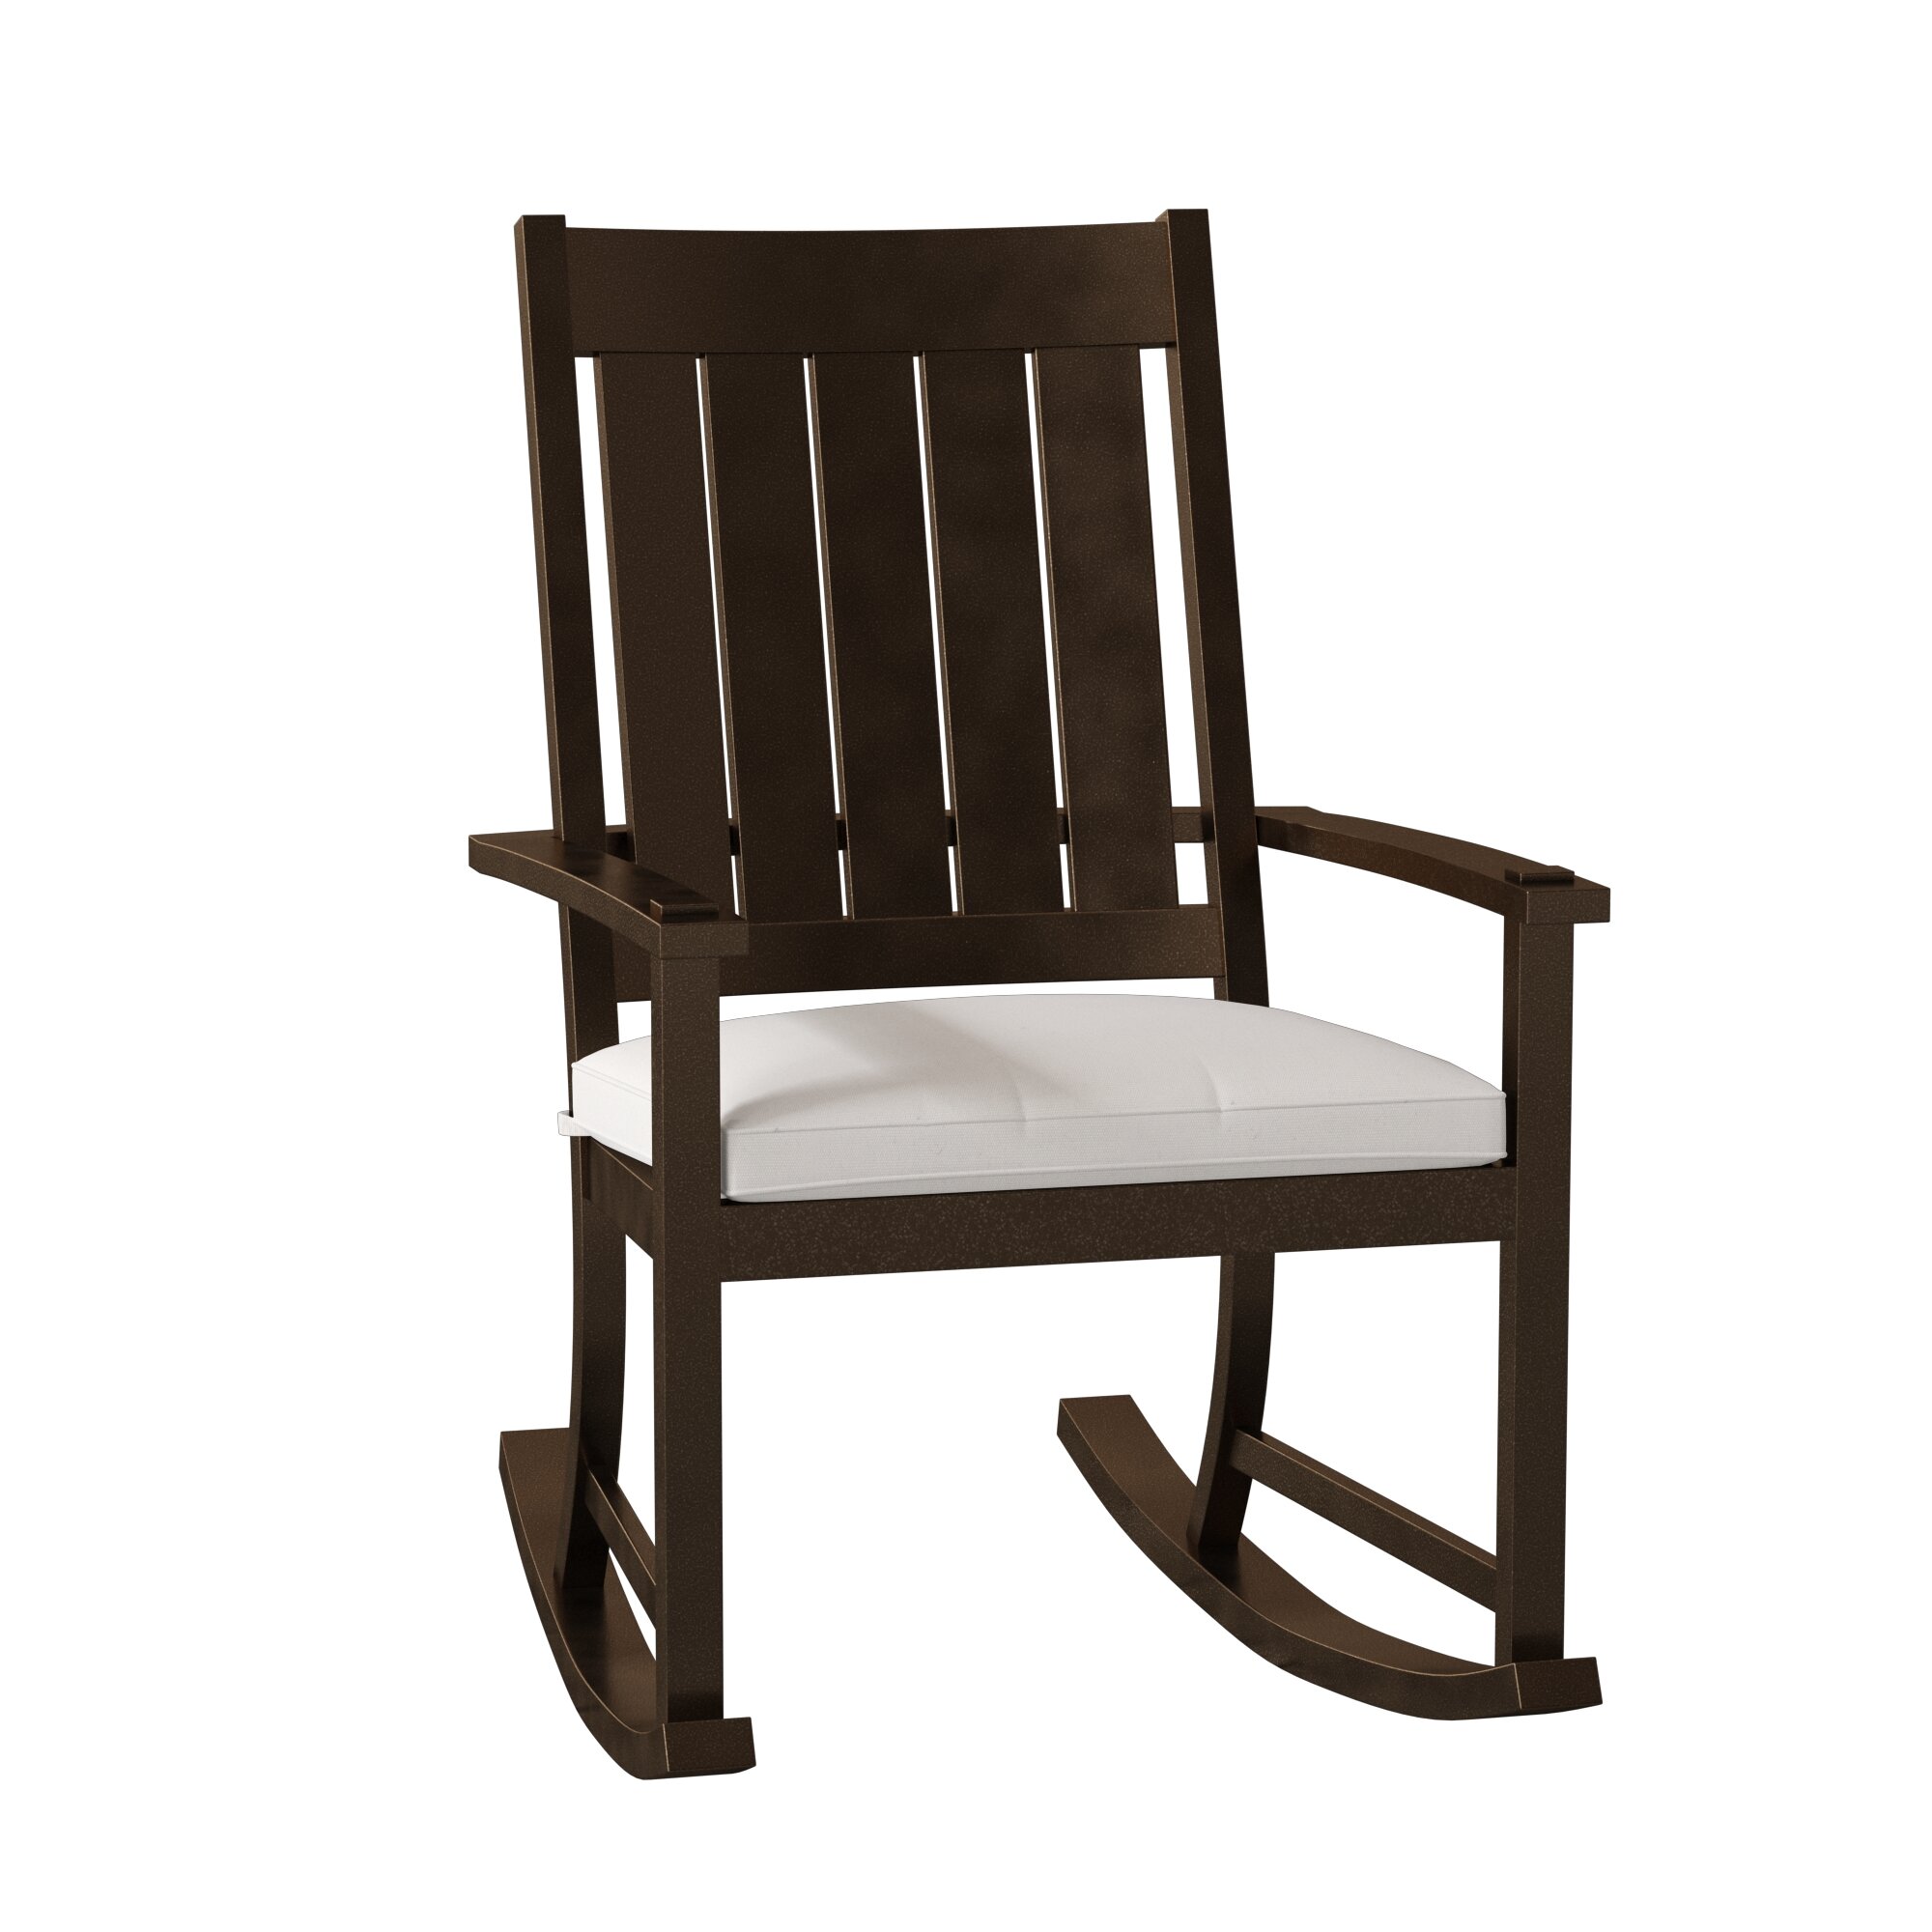 Eliminate Fatigue White Folding Garden Chairs Heavy Duty Leisure Nap Rocking Chair Home Lazy Wooden Chair for Balcony Living Room 